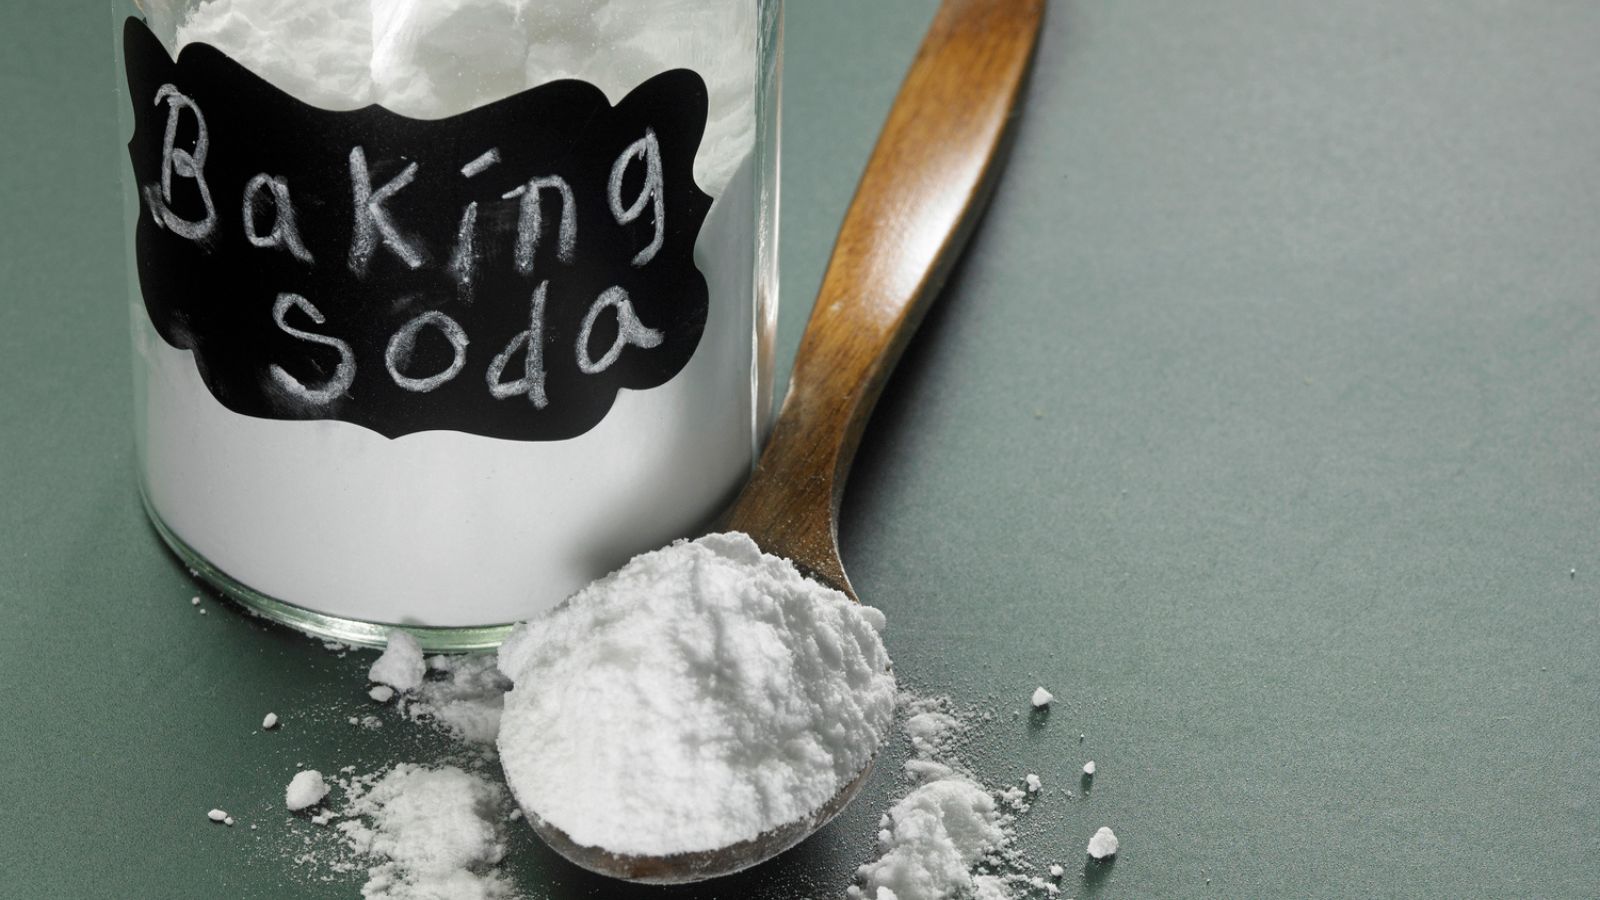 baking soda on spoon and in jar